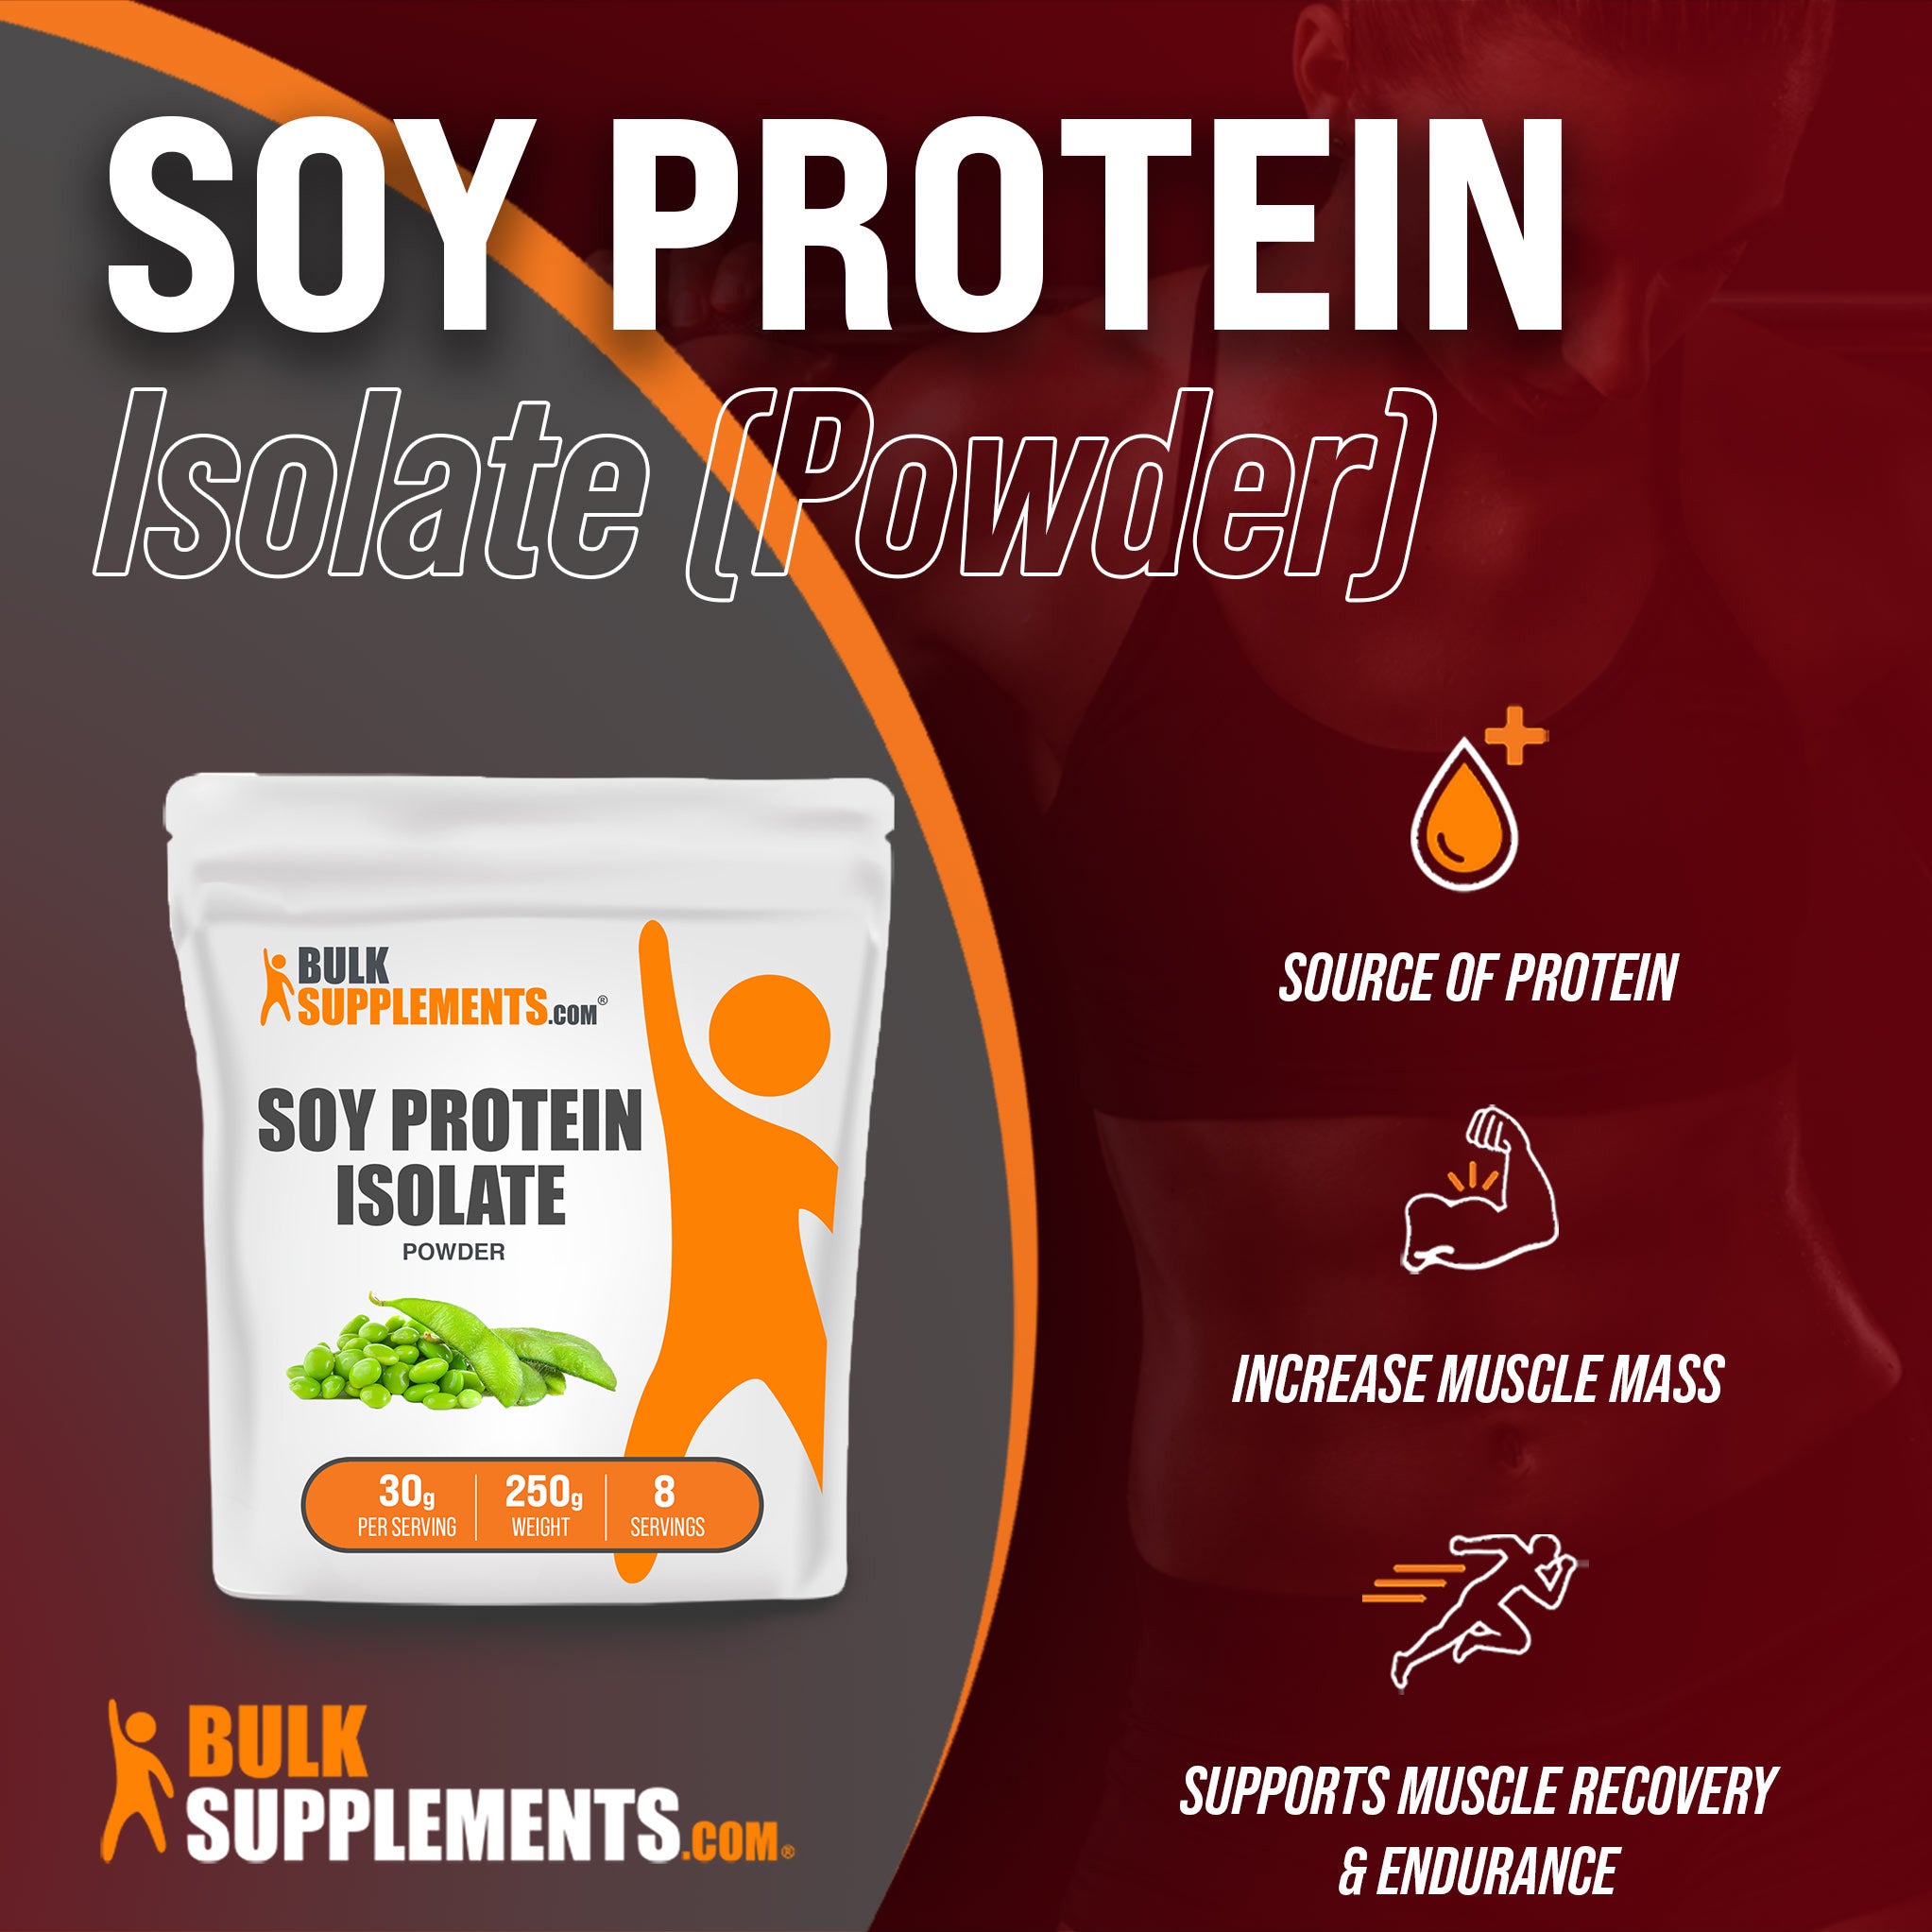 Benefits of Soy Protein Isolate Powder: source of protein, increase muscle mass, supports muscle recovery and endurance